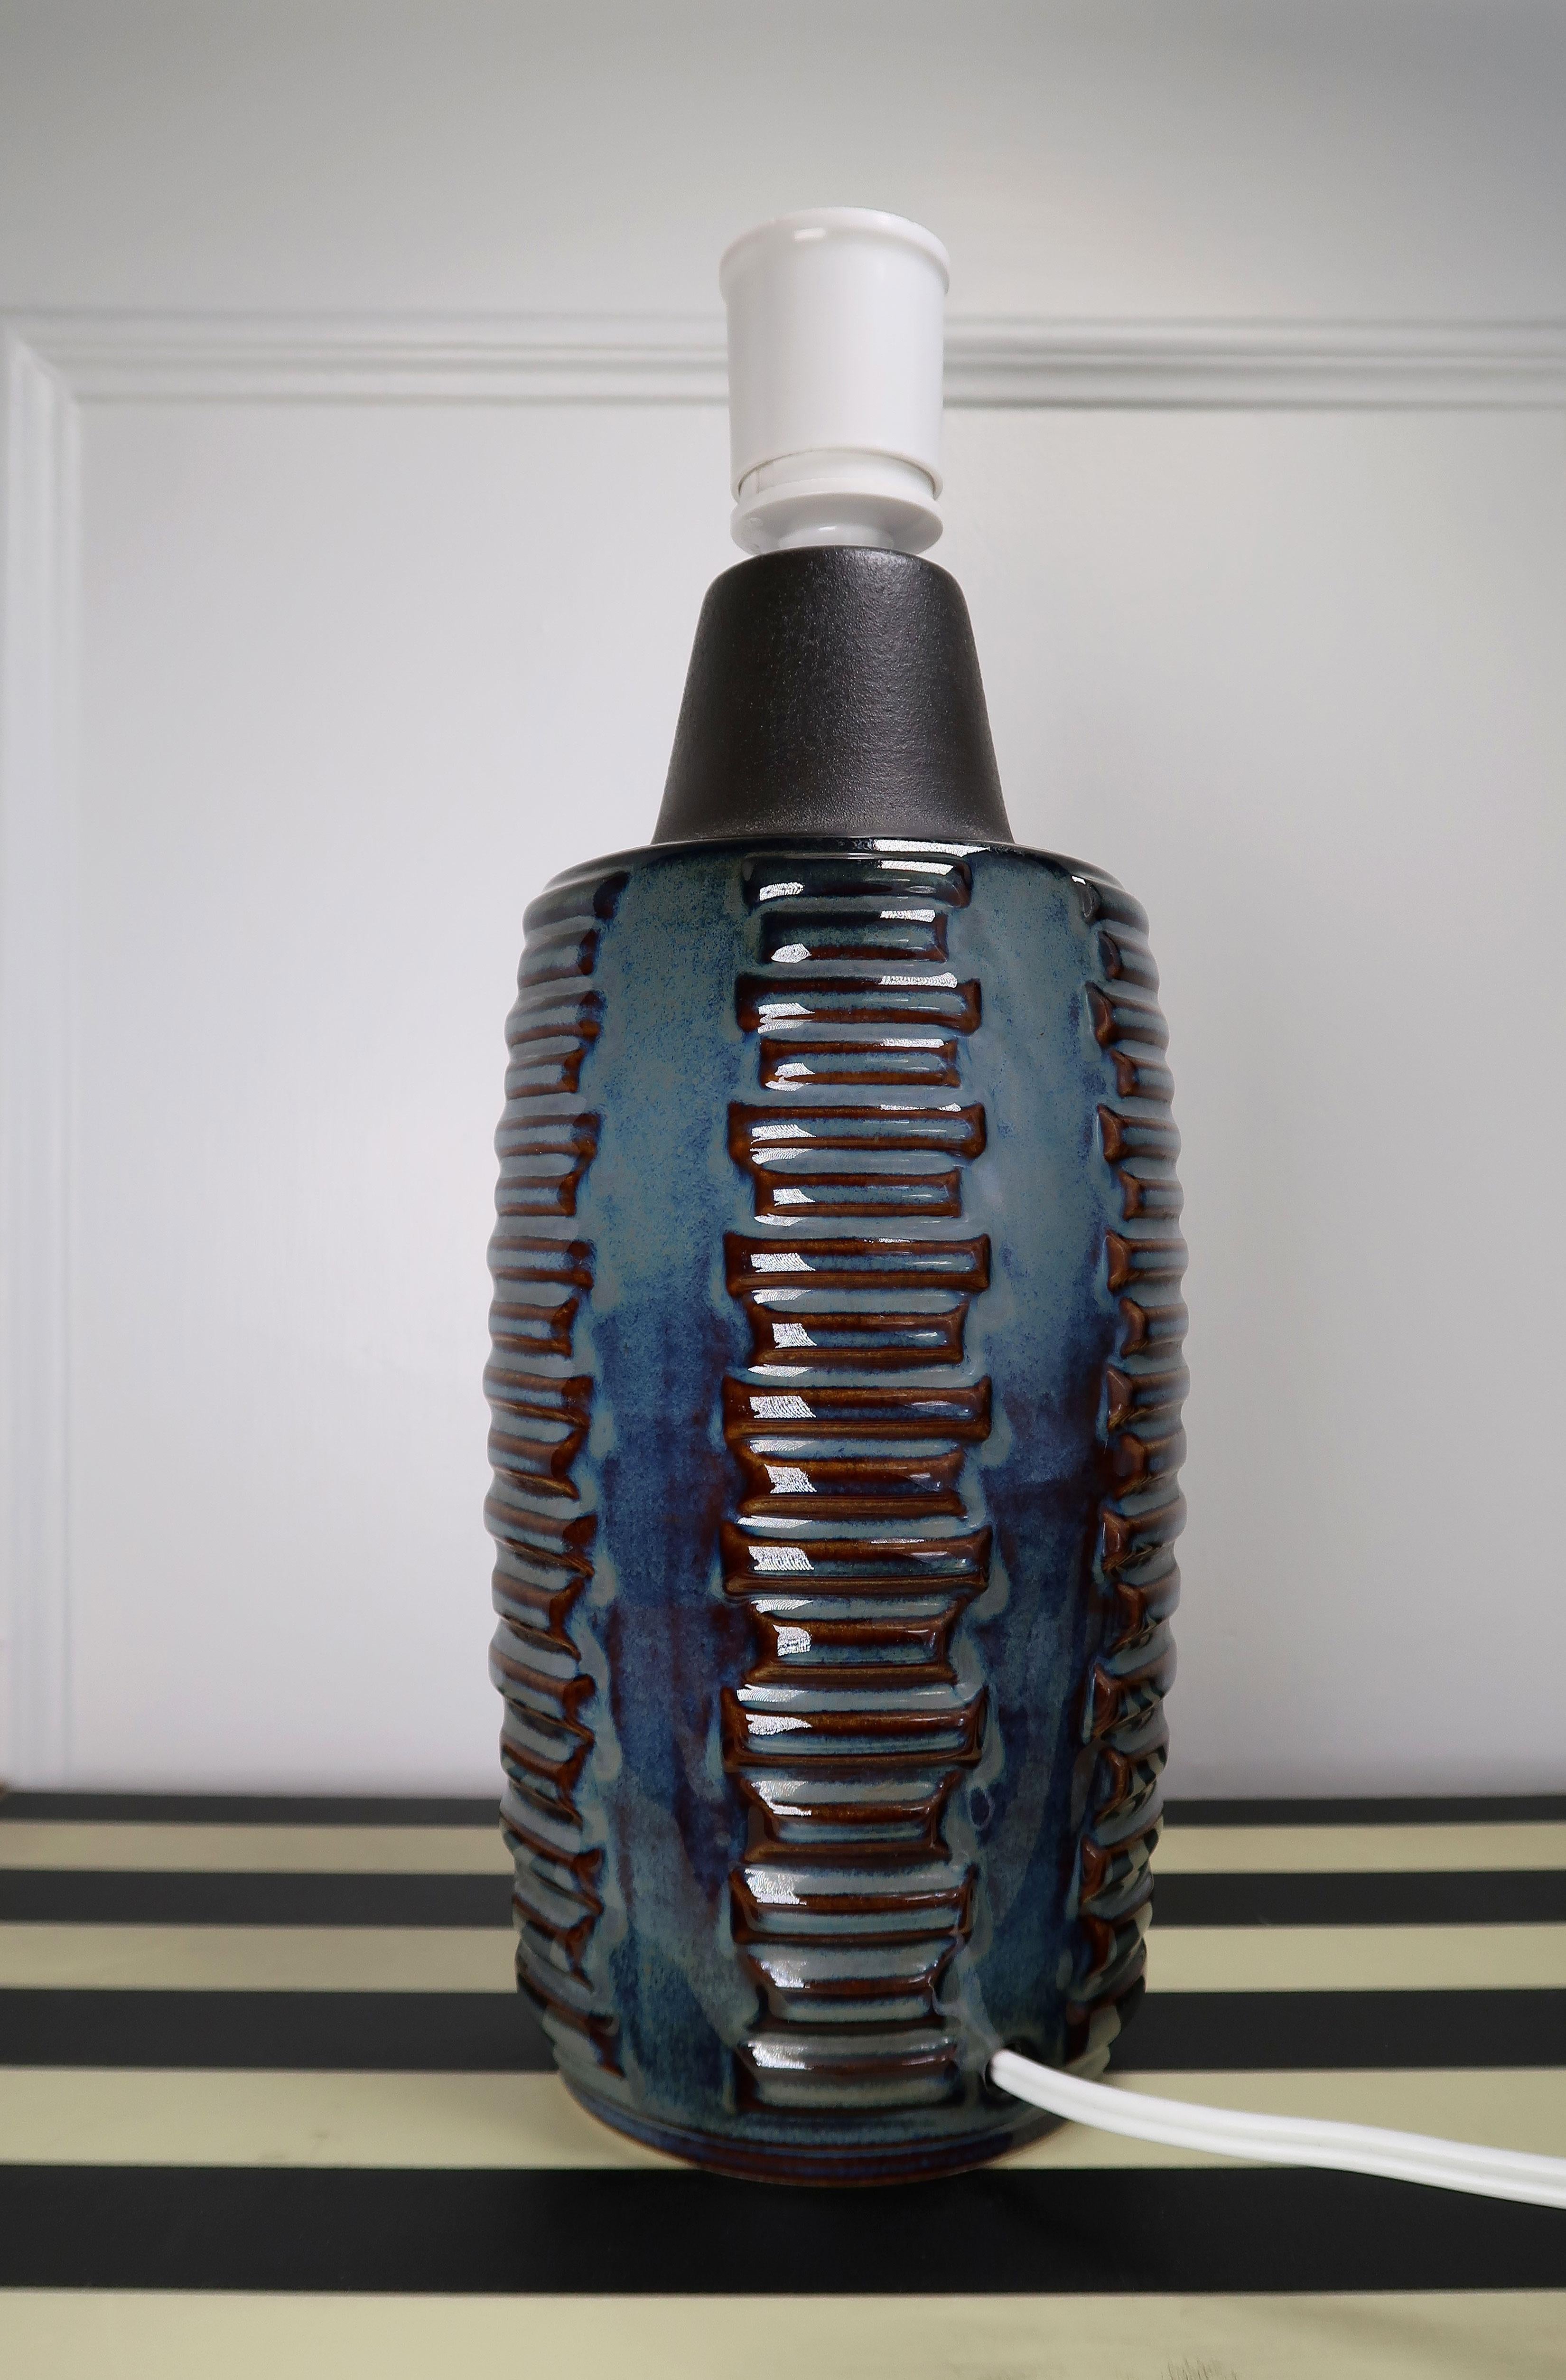 Glossy blue and caramel glaze under a matte black neck on this Einar Johansen stoneware table lamp from the early 1960s. A Danish midcentury classic style and shape with relief lined pattern around the body. Manufactured by Søholm Stentøj on the